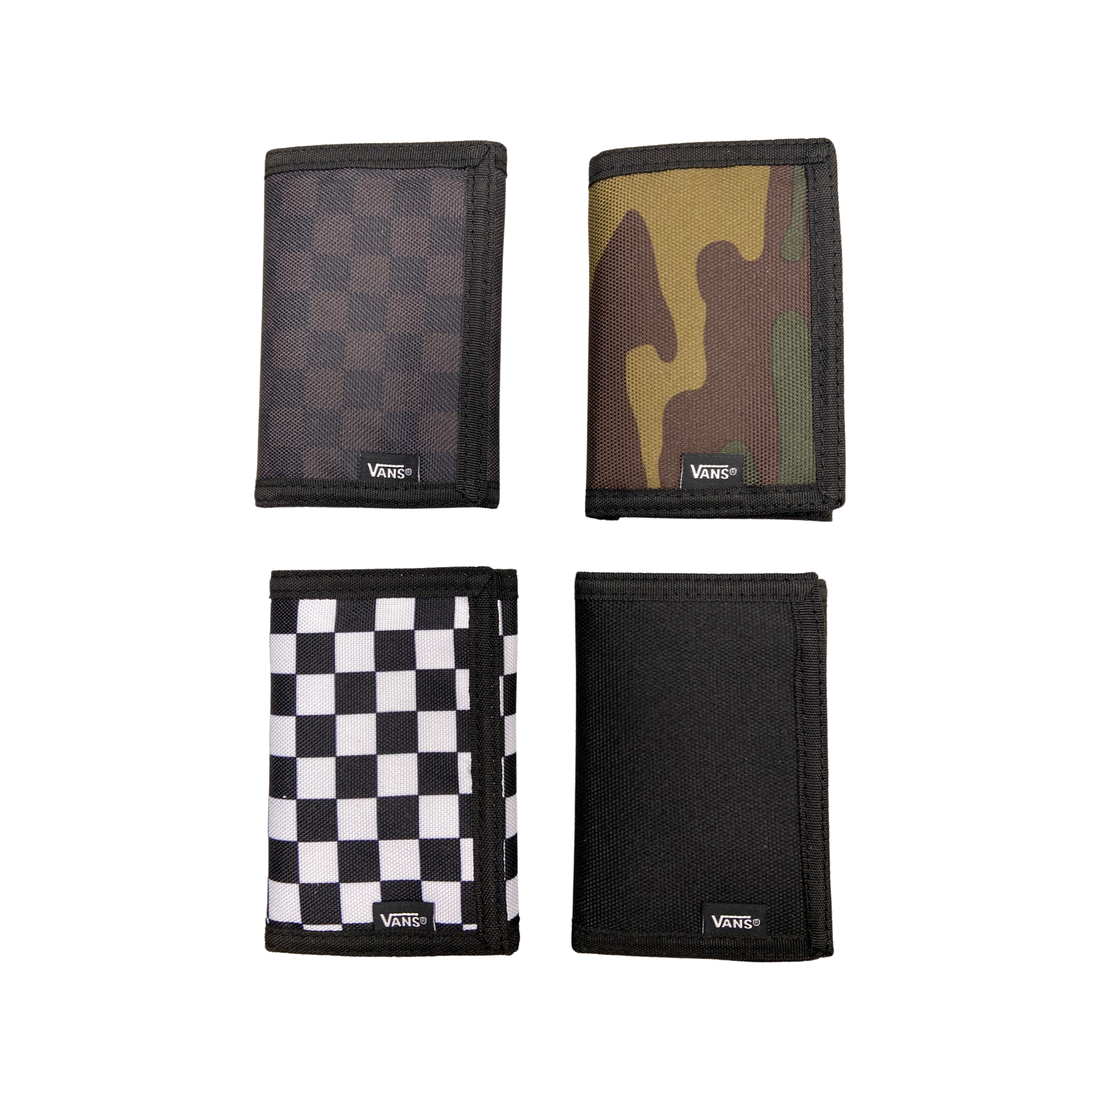 Vans Slipped Wallet Assorted Colors